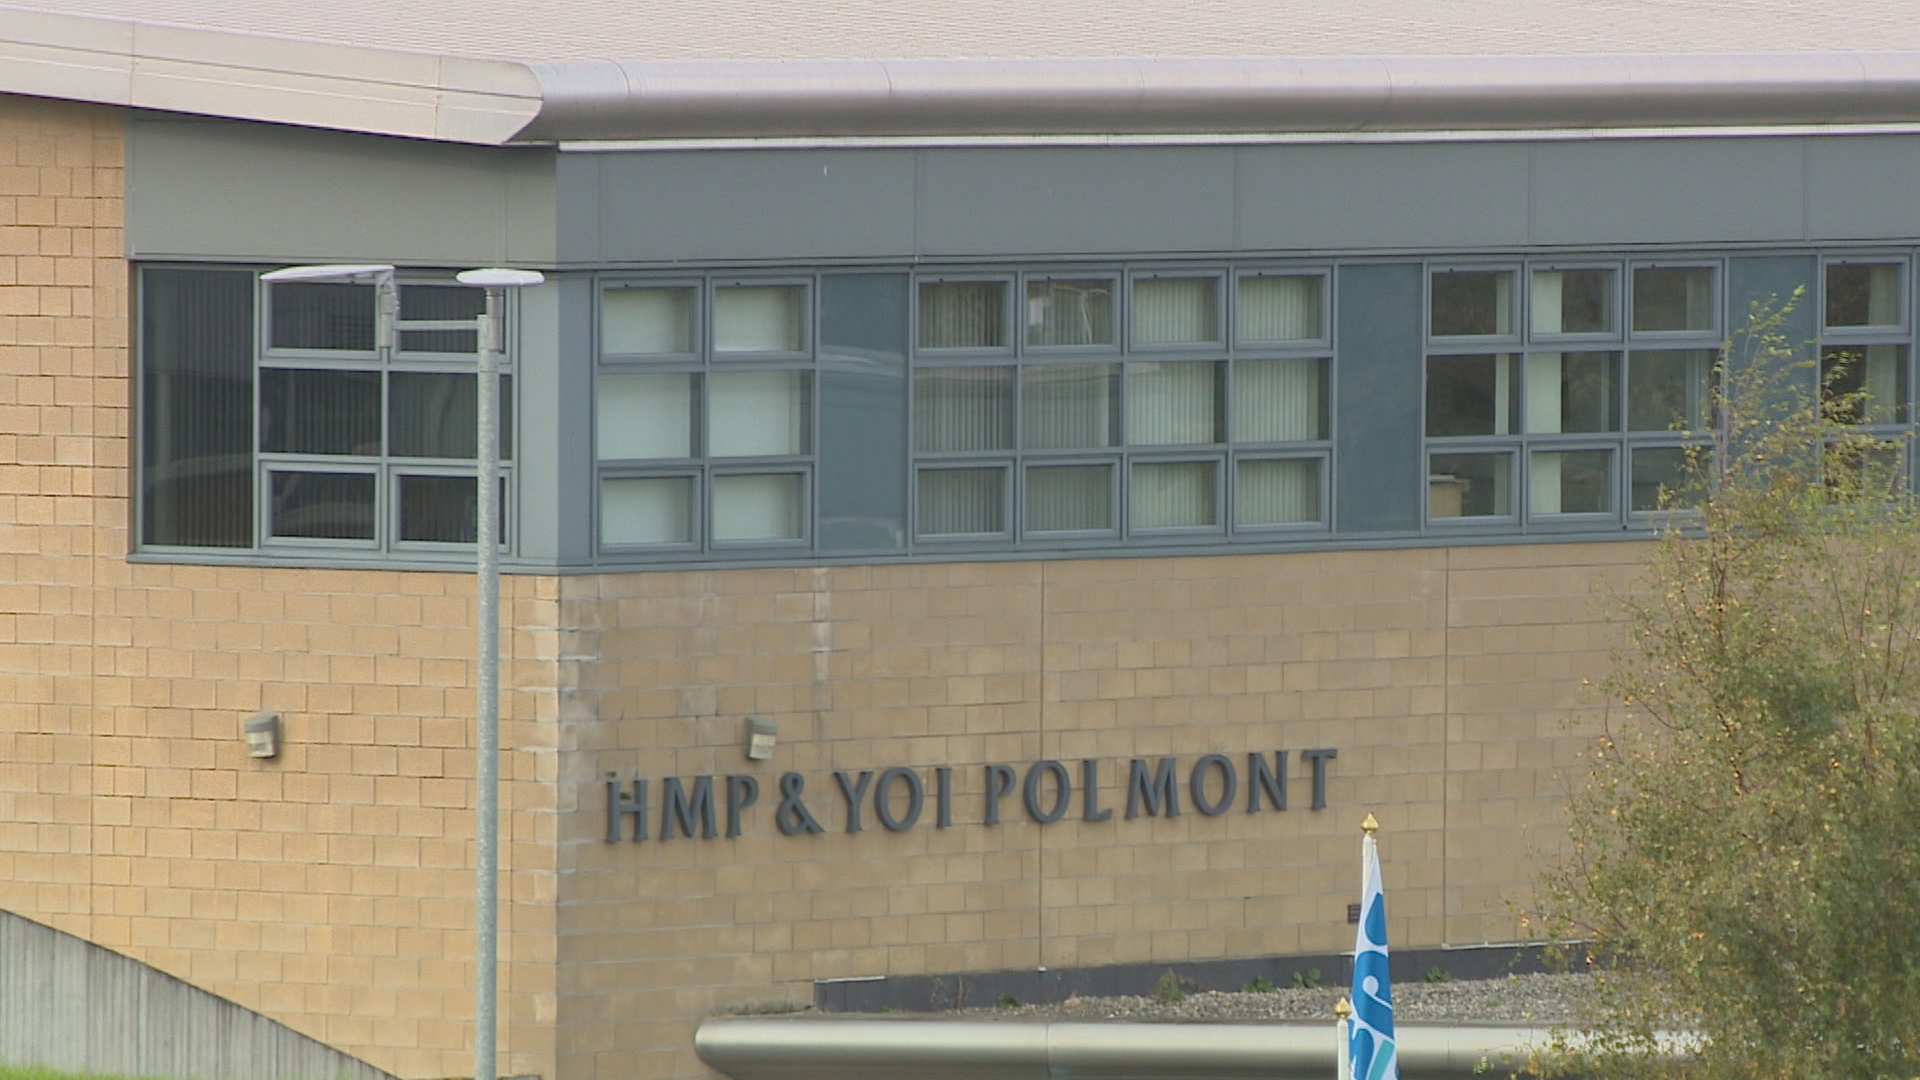 HMYOI Polmont is the national holding facility for male young offenders.